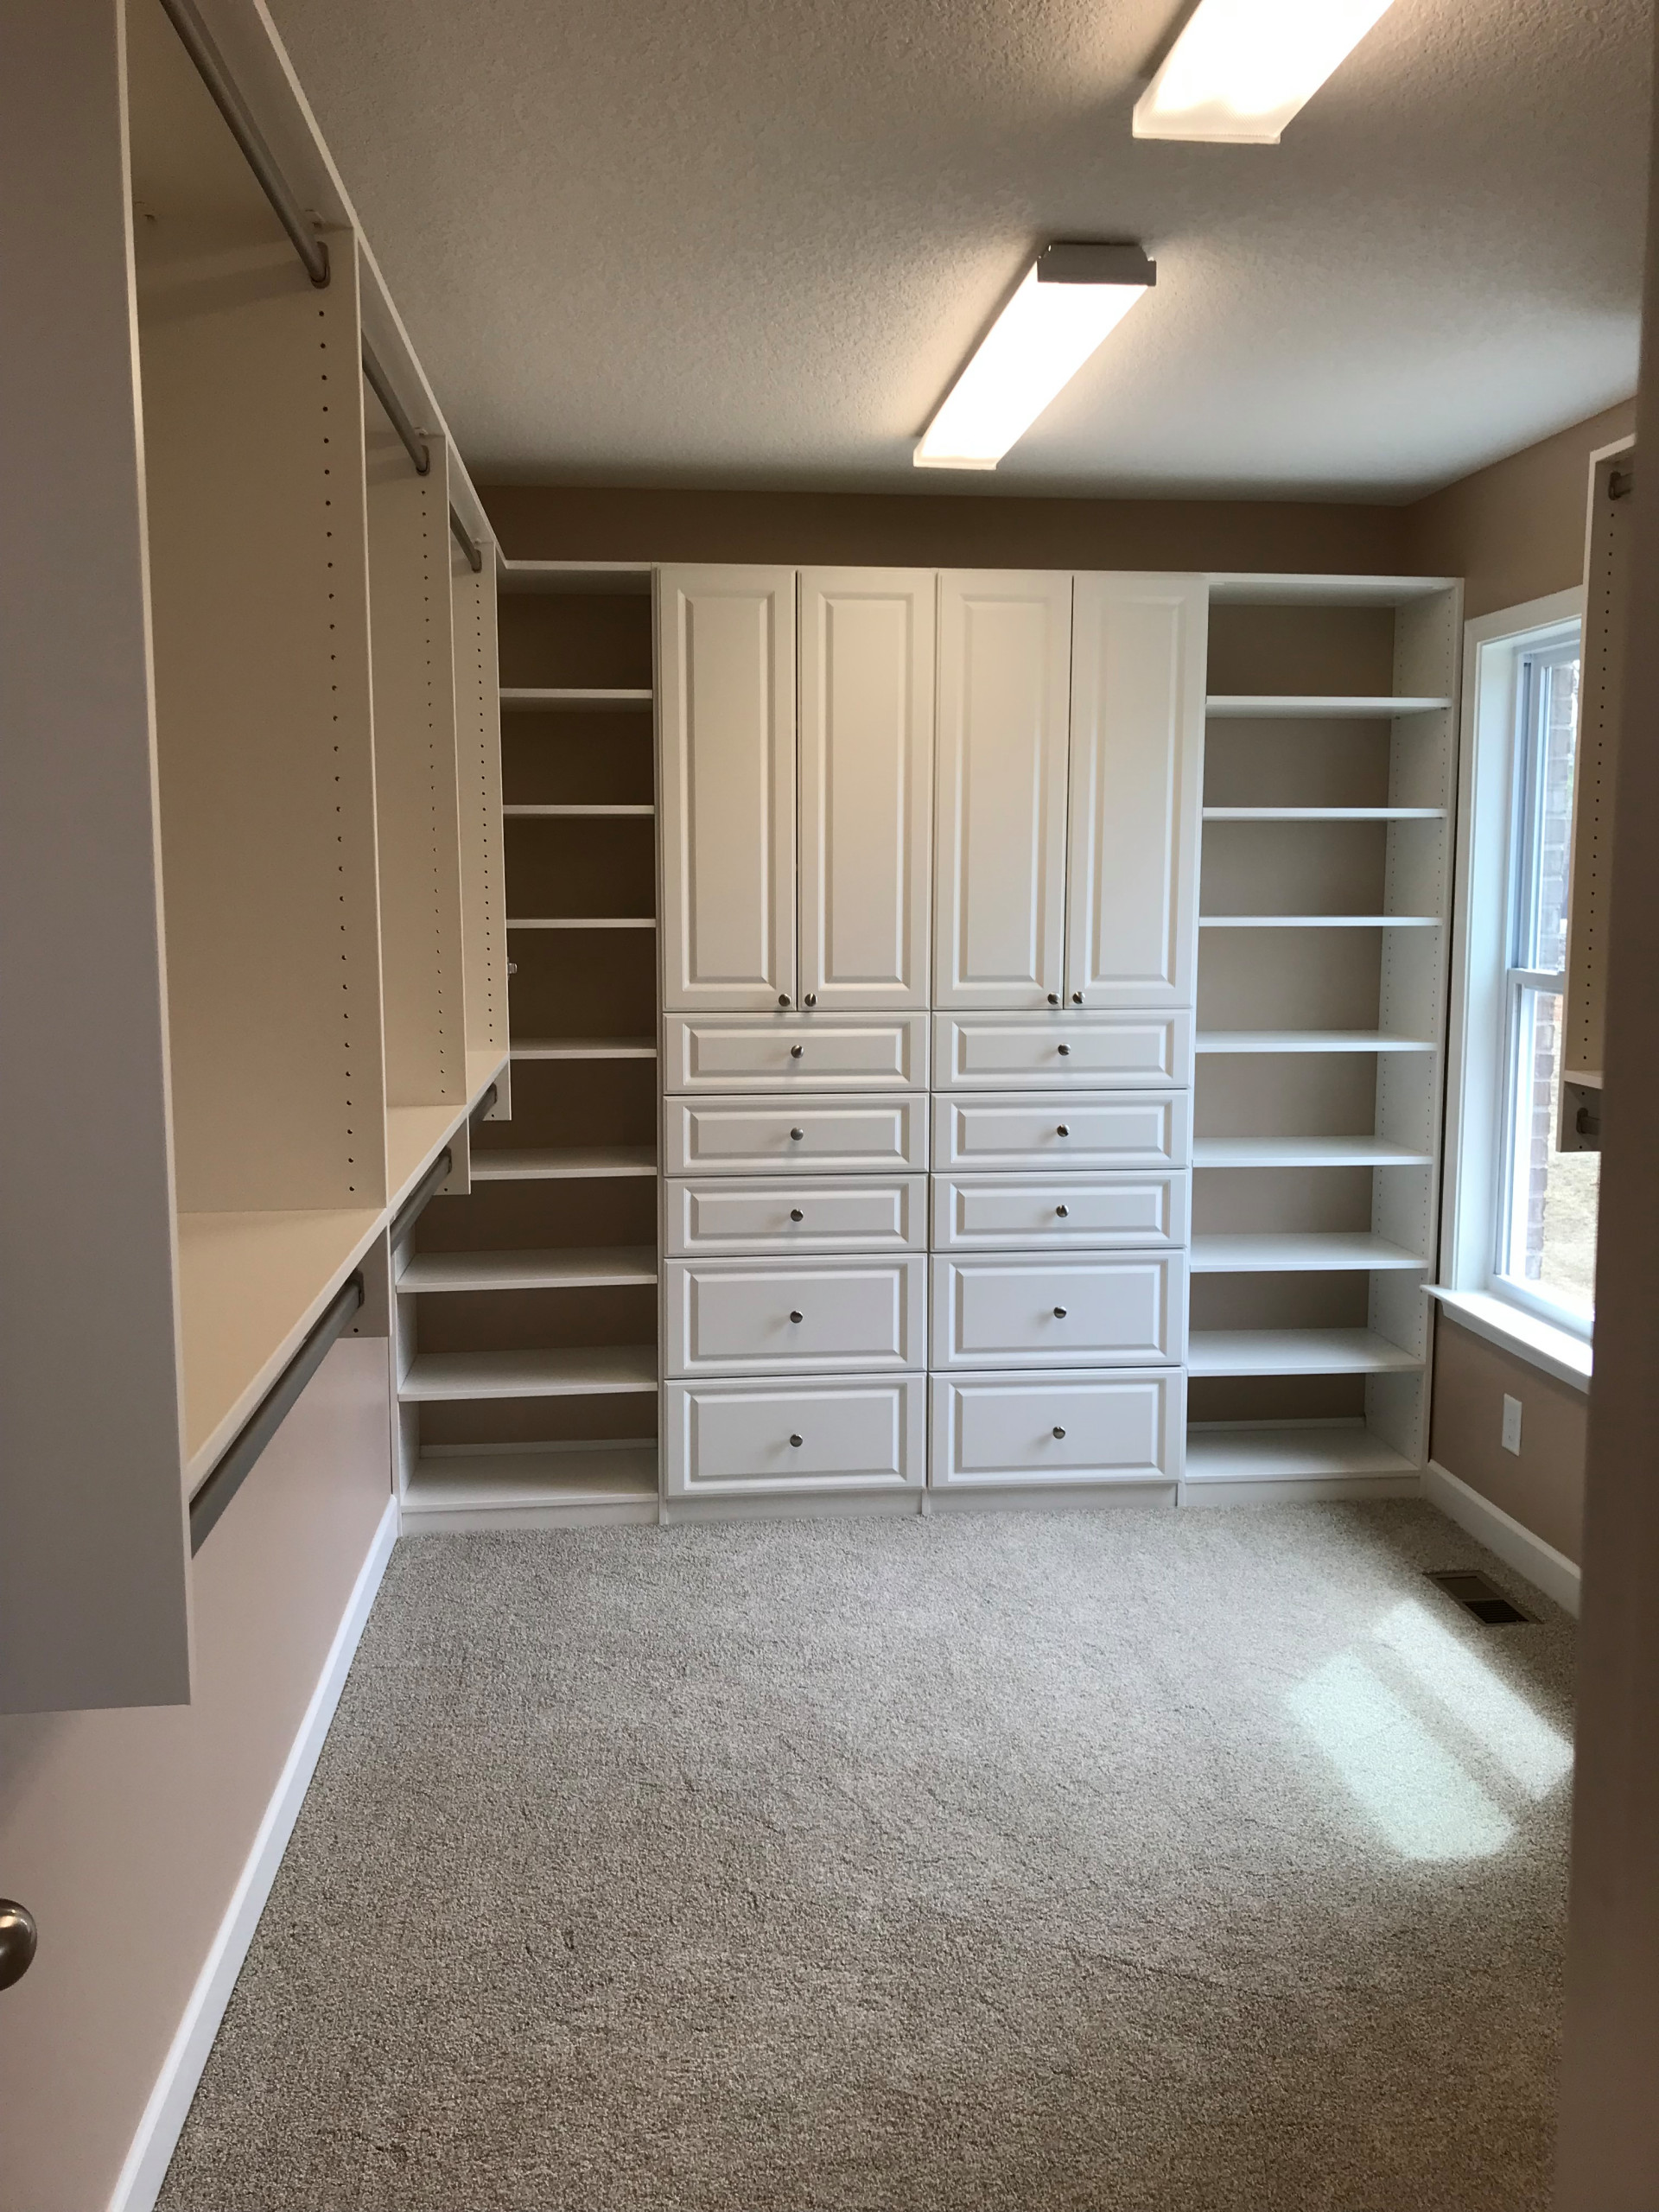 Primary Closet with Raised Panel Cabinets and Drawers